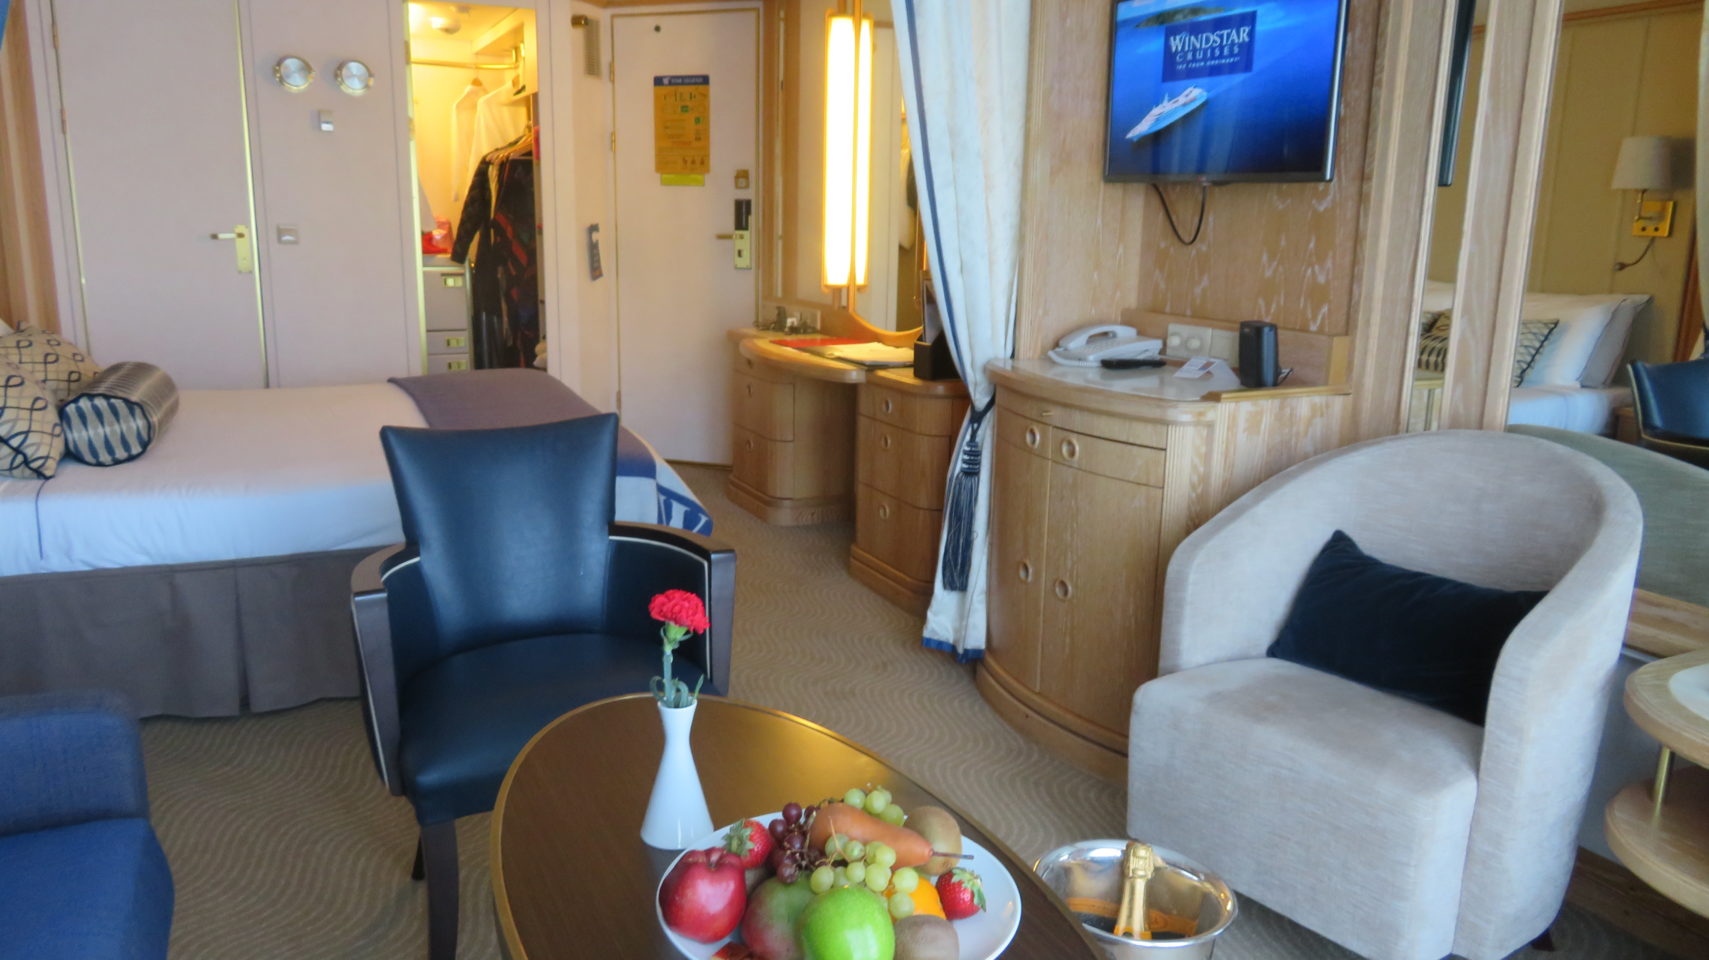 Windstar Cruises ~ our ideal cabin, from fresh fruit to the perfect dressing table with both American and European outlets